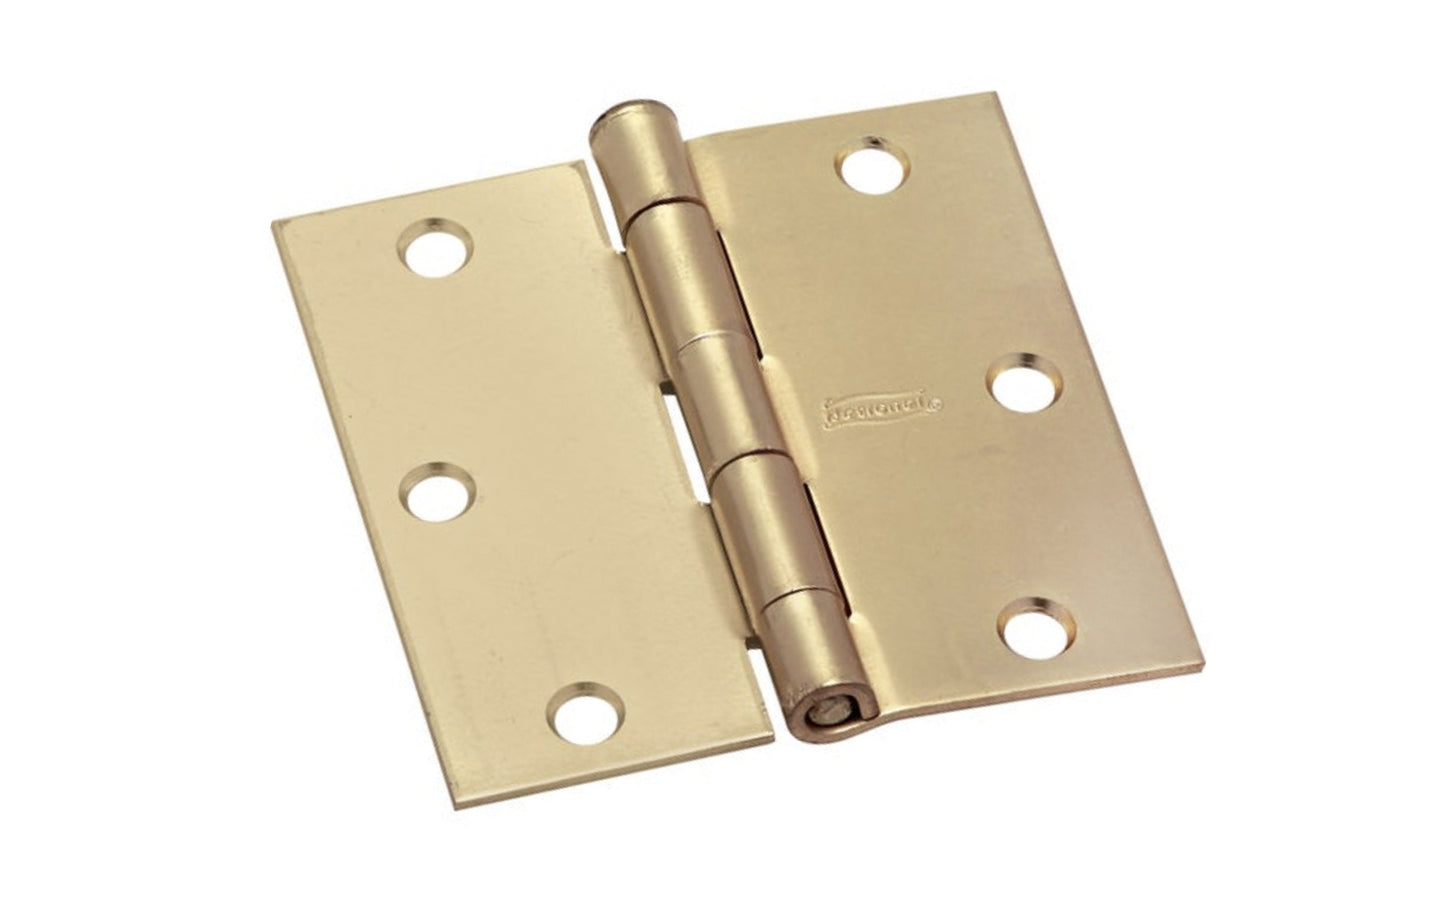 3" Satin Brass Door Hinge with square corners & a removable pin. Satin Brass finish on steel material. Countersunk holes. Includes flat head screws. 3" x 3" door hinge size. Five knuckle, full mortise design. National Hardware Model No. N830-232. 886780009729